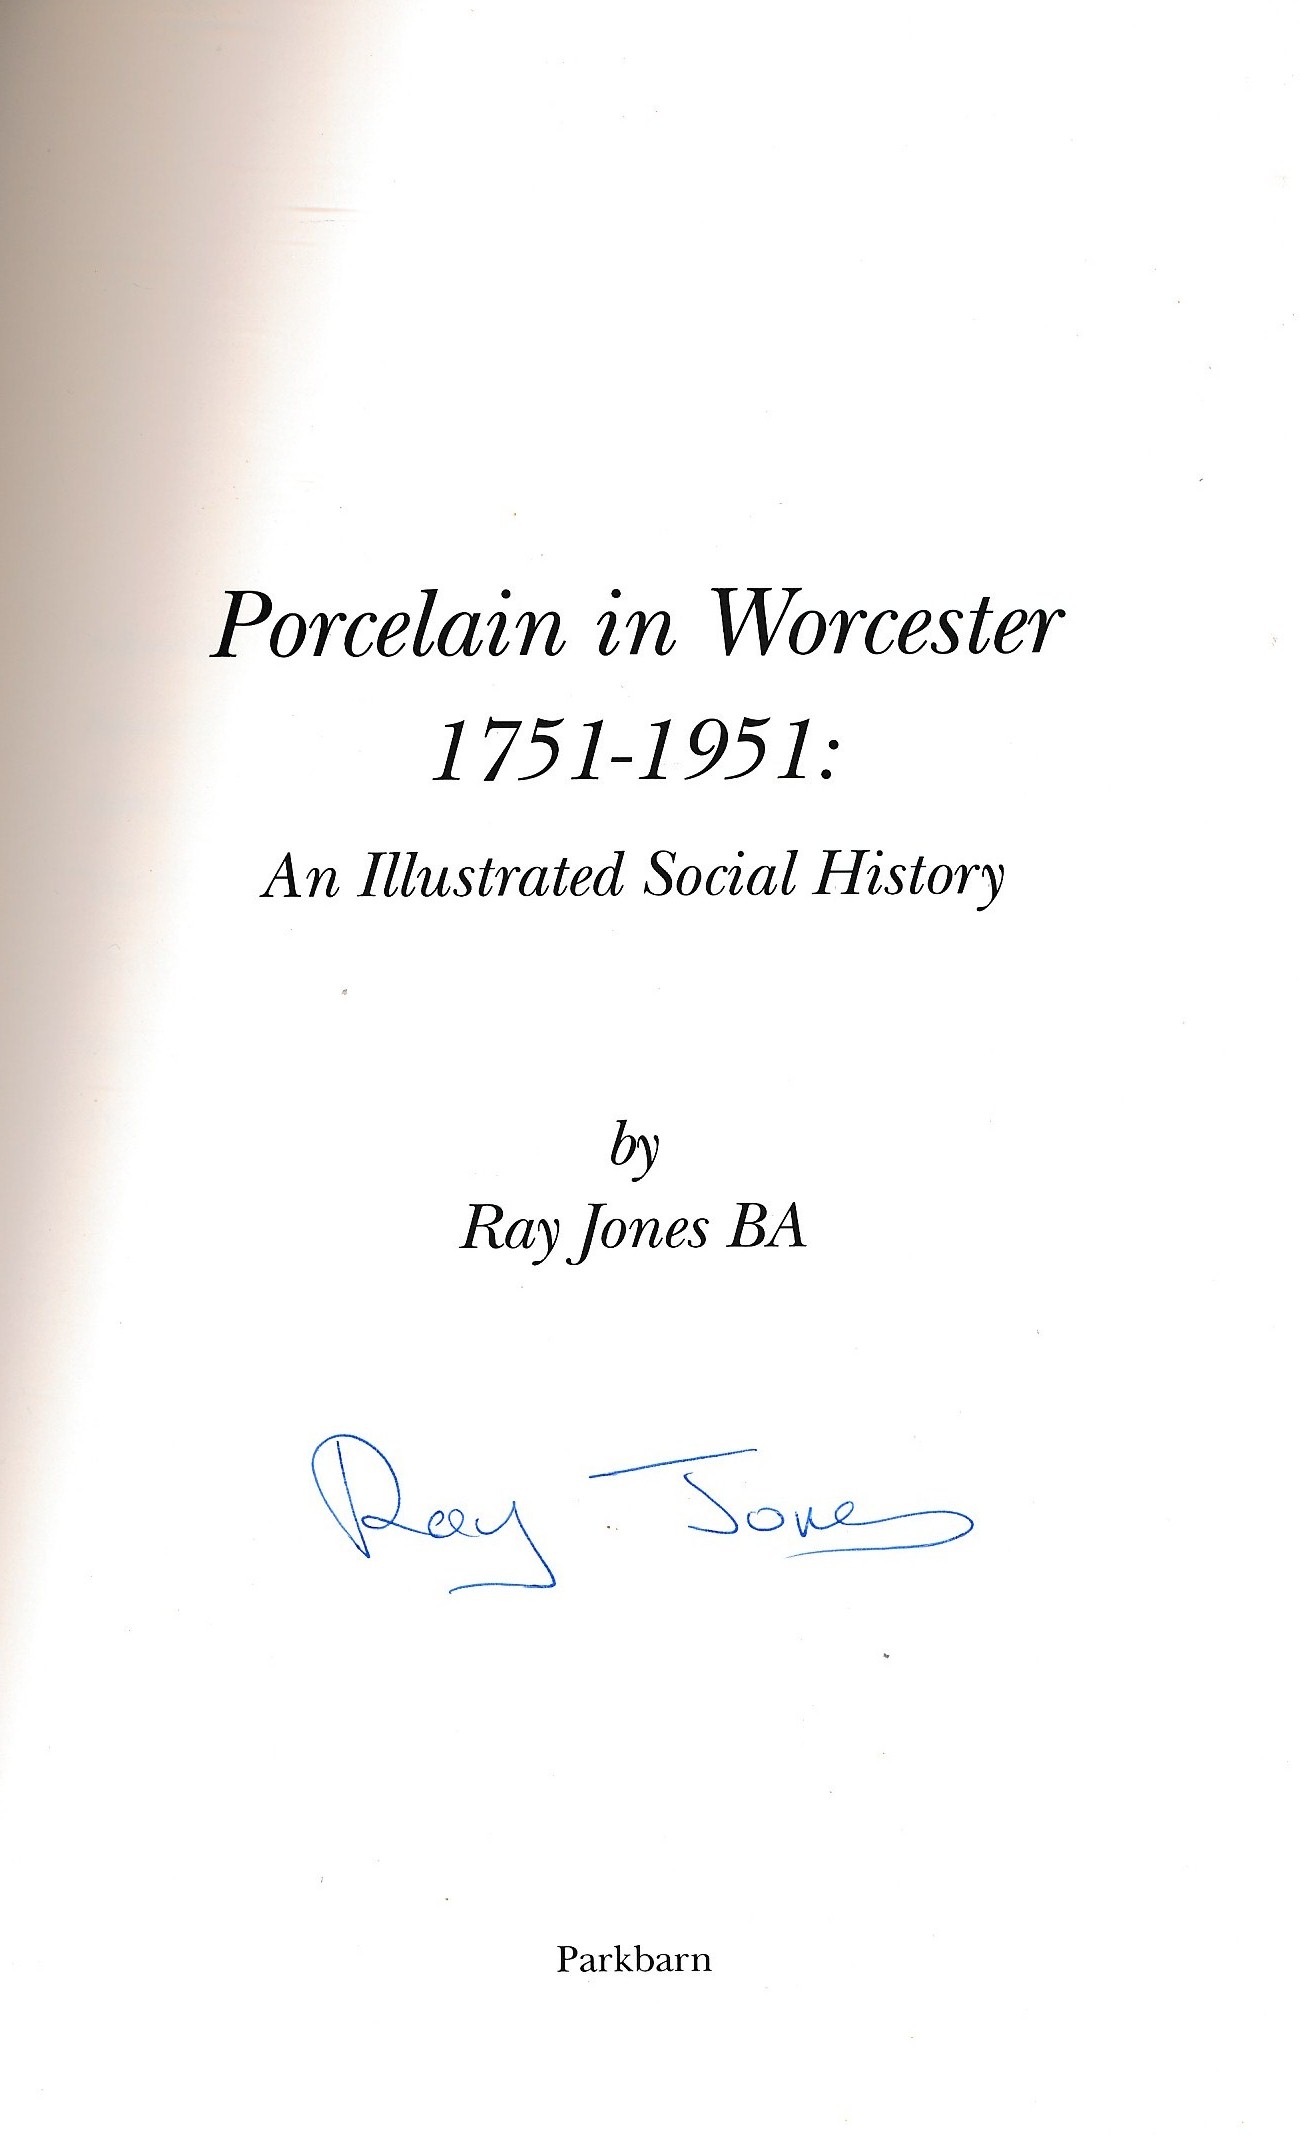 Porcelain in Worcester 1751-1951. An Illustrated Social History. Signed copy.